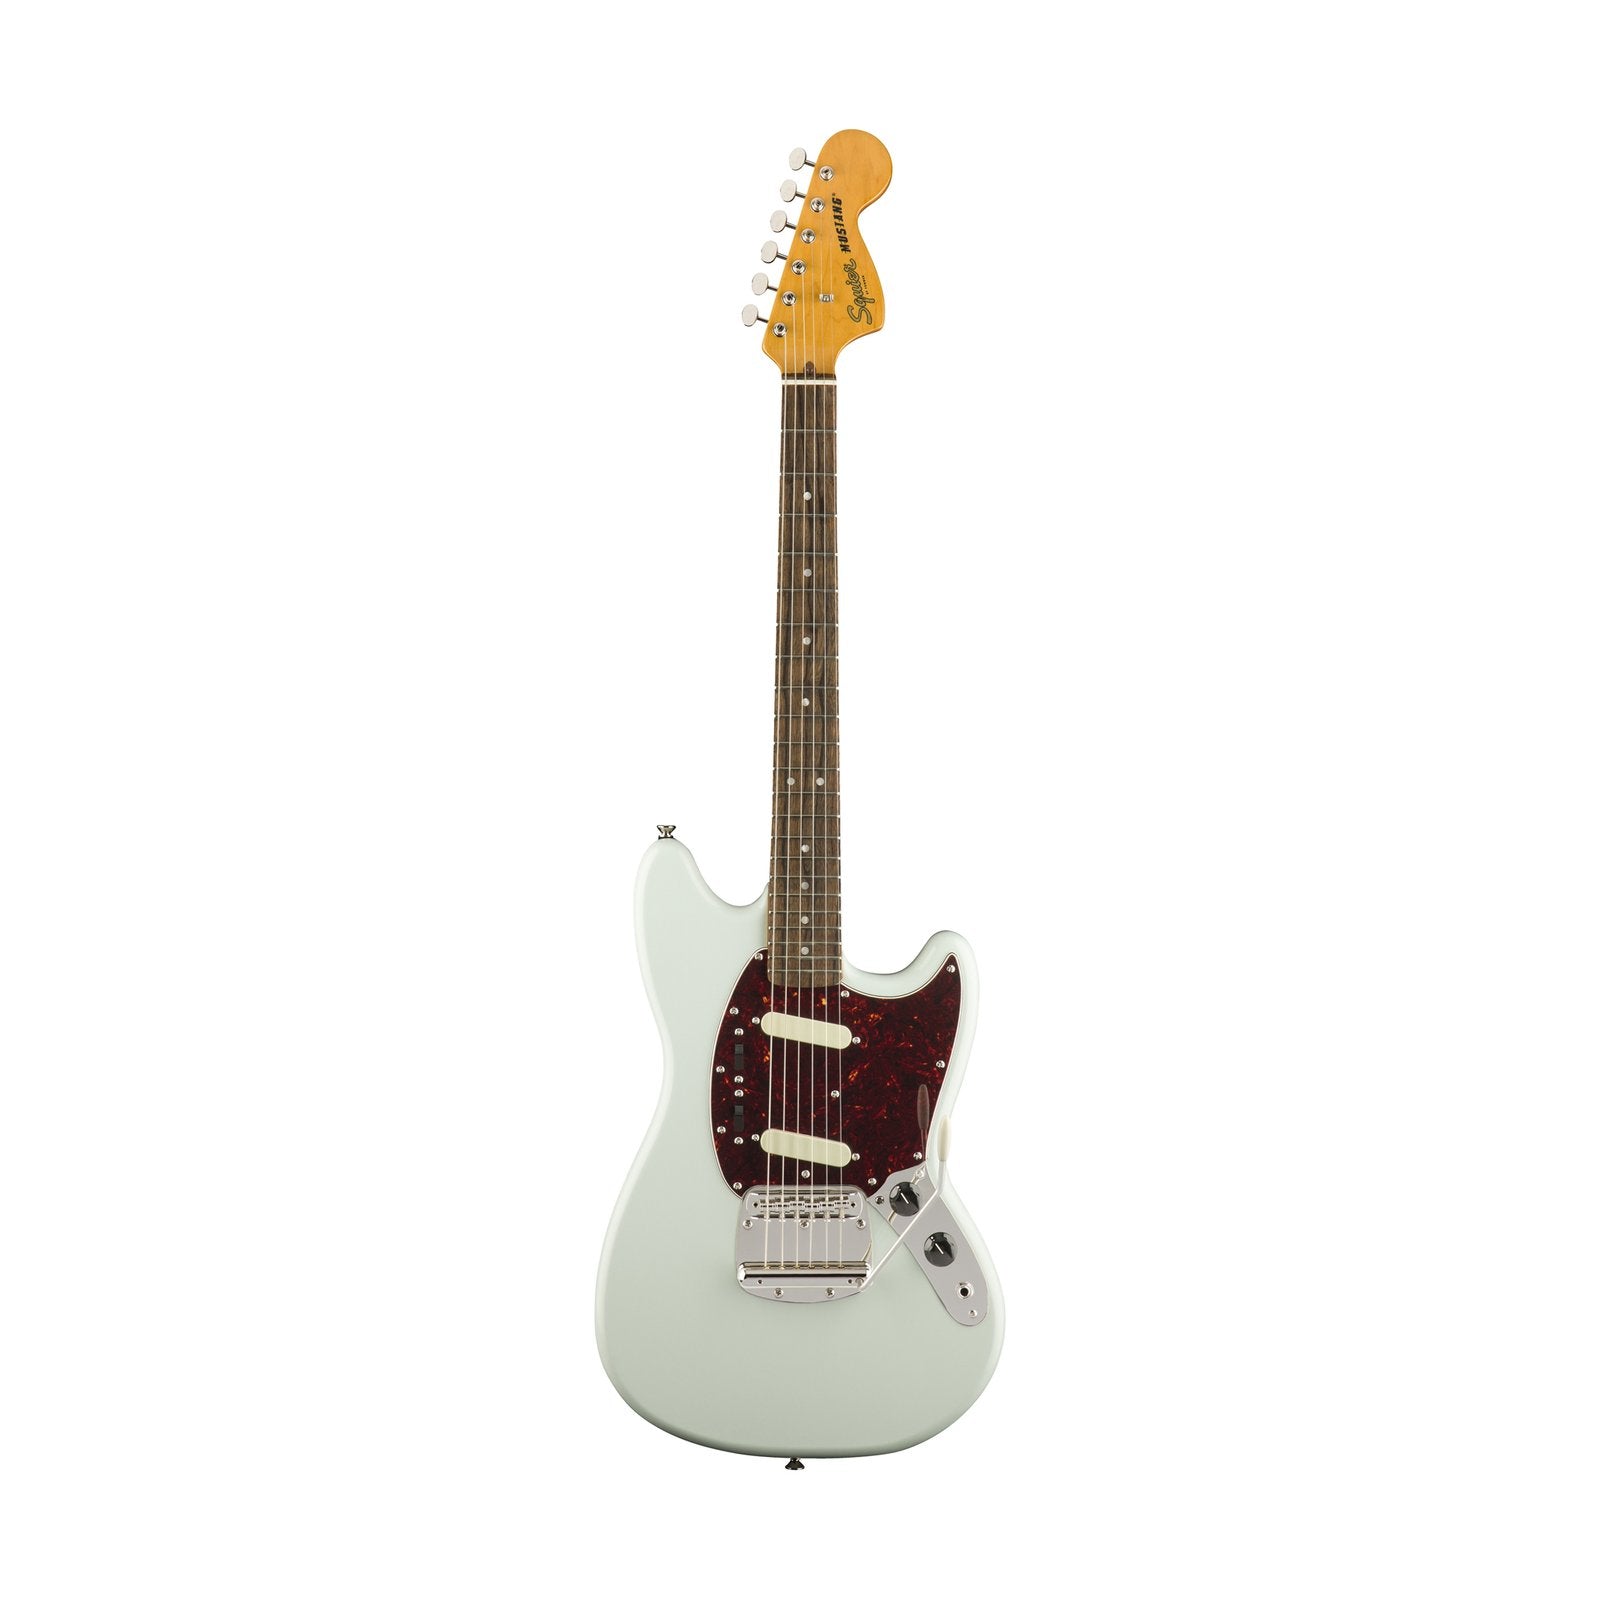 Squier Classic Vibe 60s Mustang Electric Guitar, Laurel FB, Sonic Blue, SQUIER BY FENDER, ELECTRIC GUITAR, squier-by-fender-electric-guitar-037-4080-572, ZOSO MUSIC SDN BHD